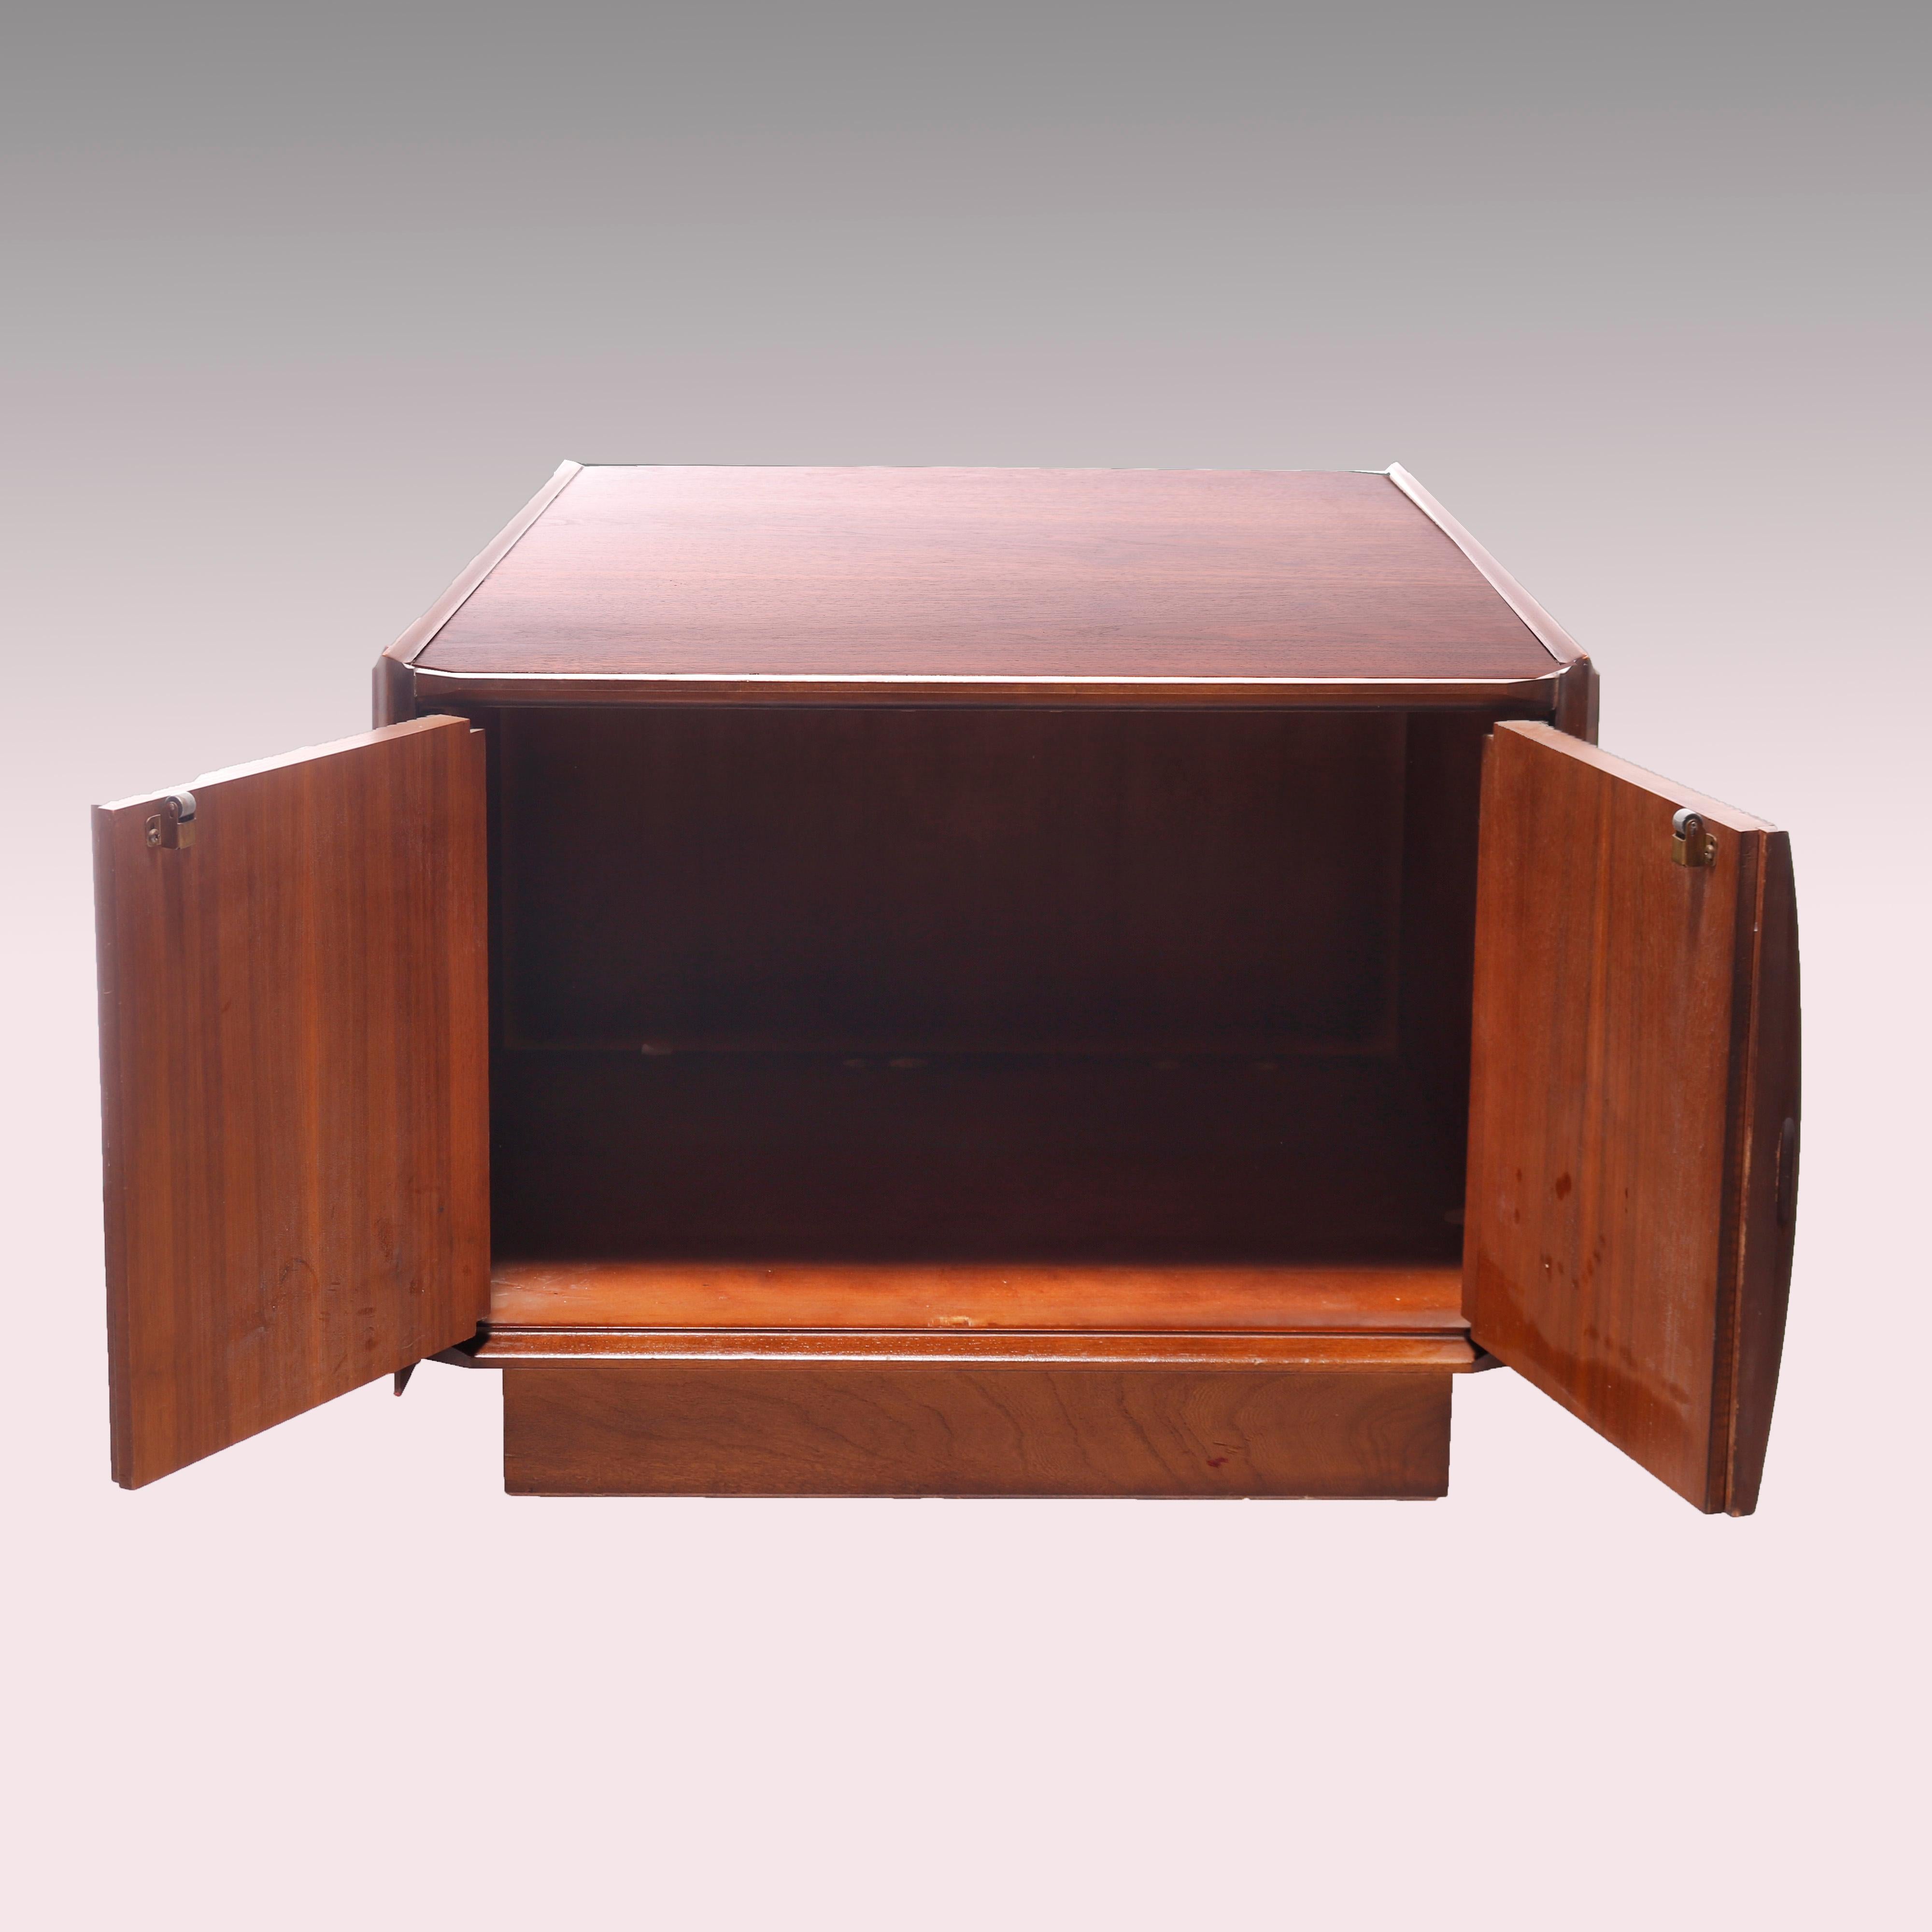 20th Century Mid Century Danish Modern Walnut End Table with Tambour Style Doors C1960 For Sale